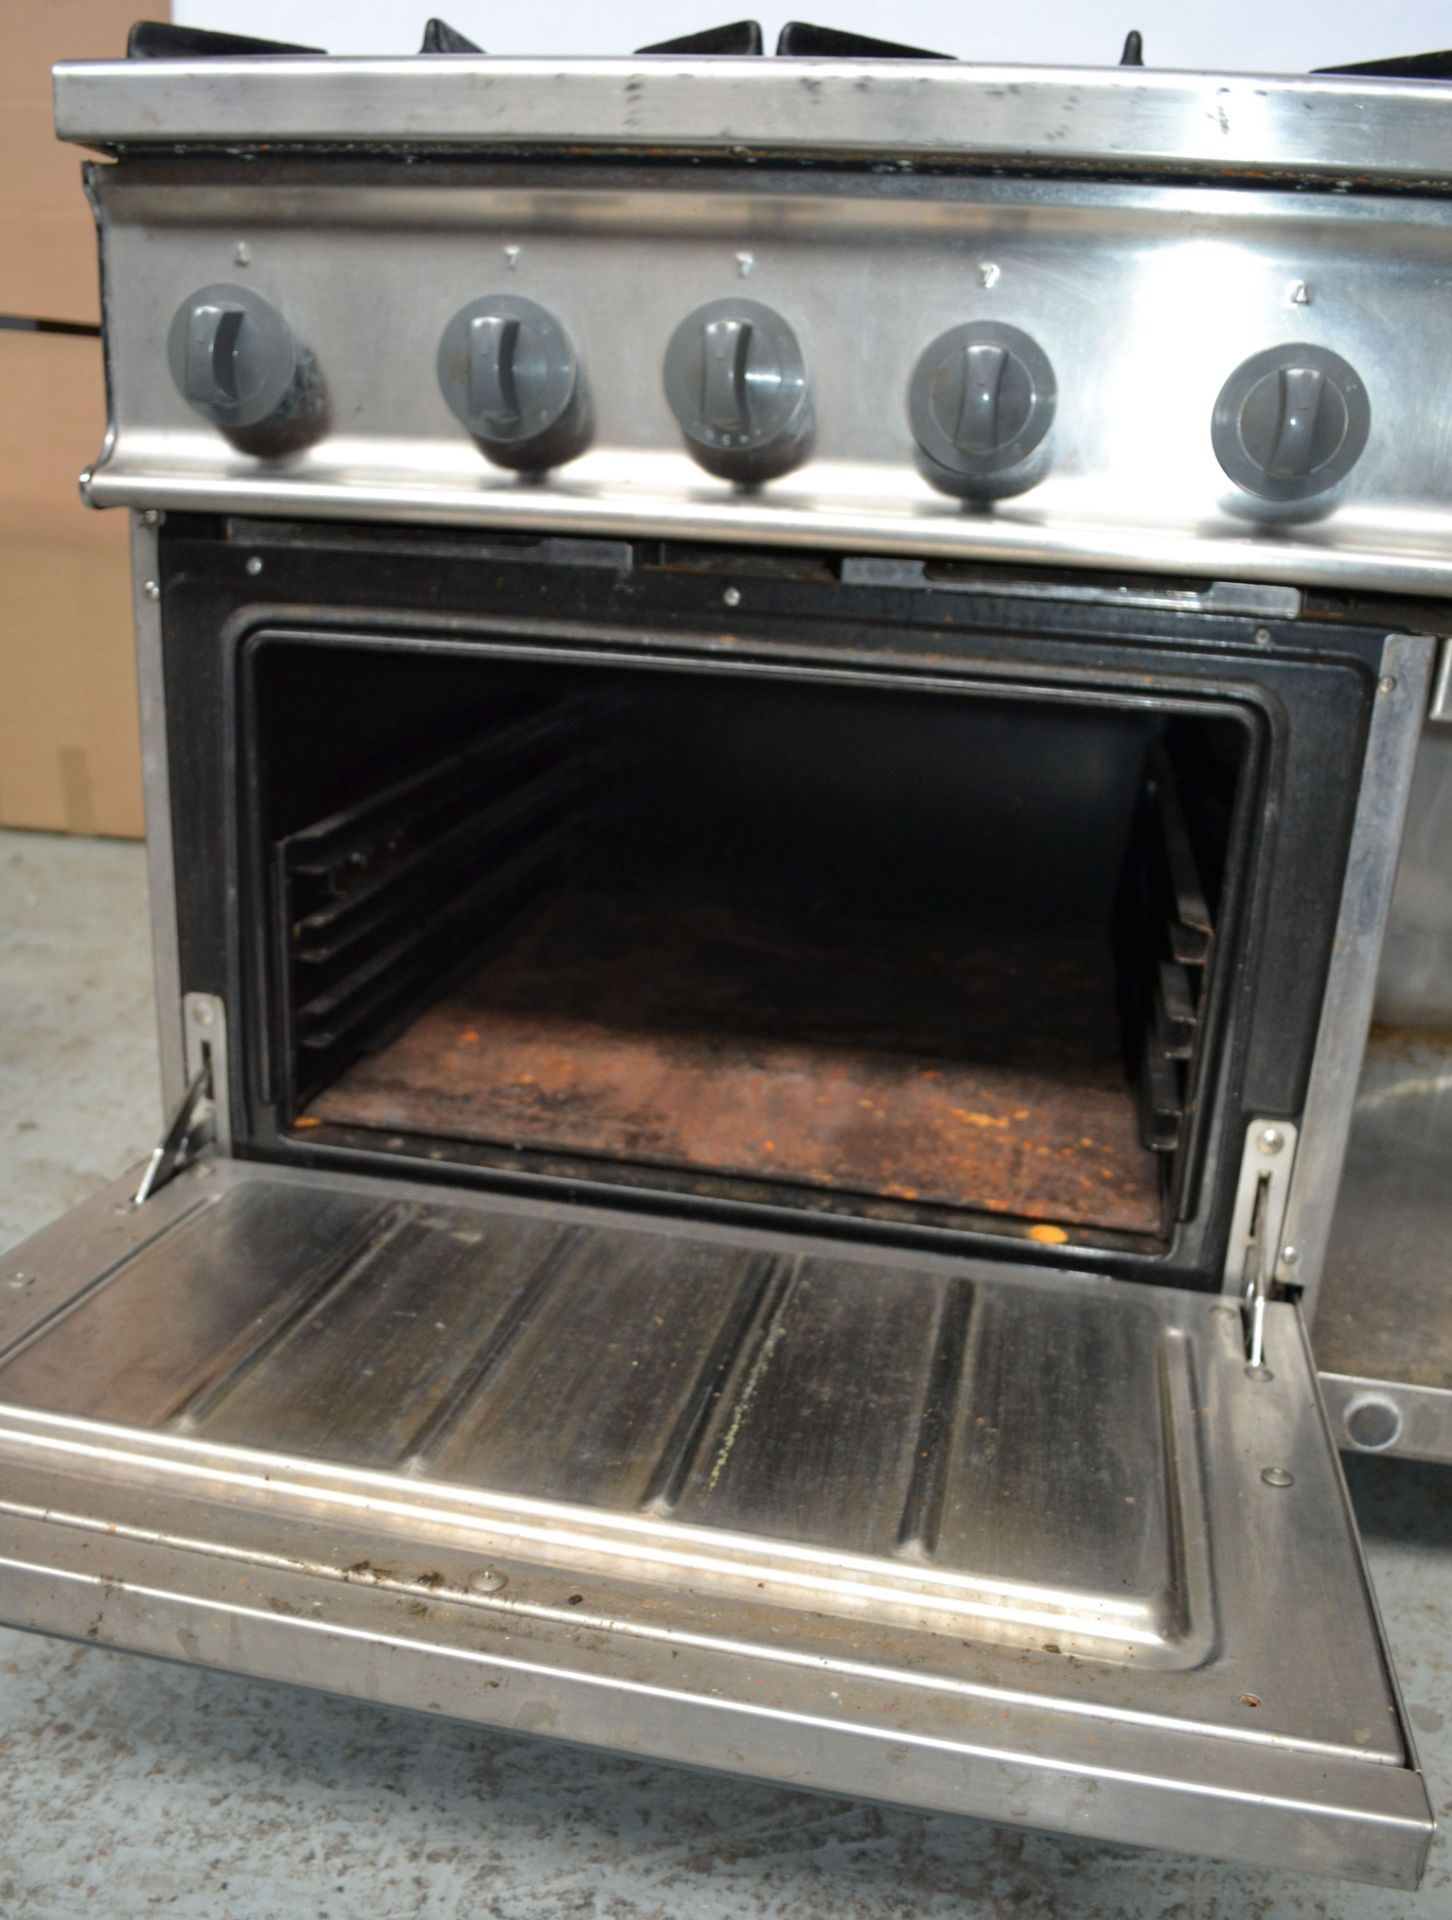 1 x Fagor Six Burner Gas Oven Range (CG-761 BR SM) - Ref NCE011 - CL178 - Location: Altrincham - Image 9 of 15